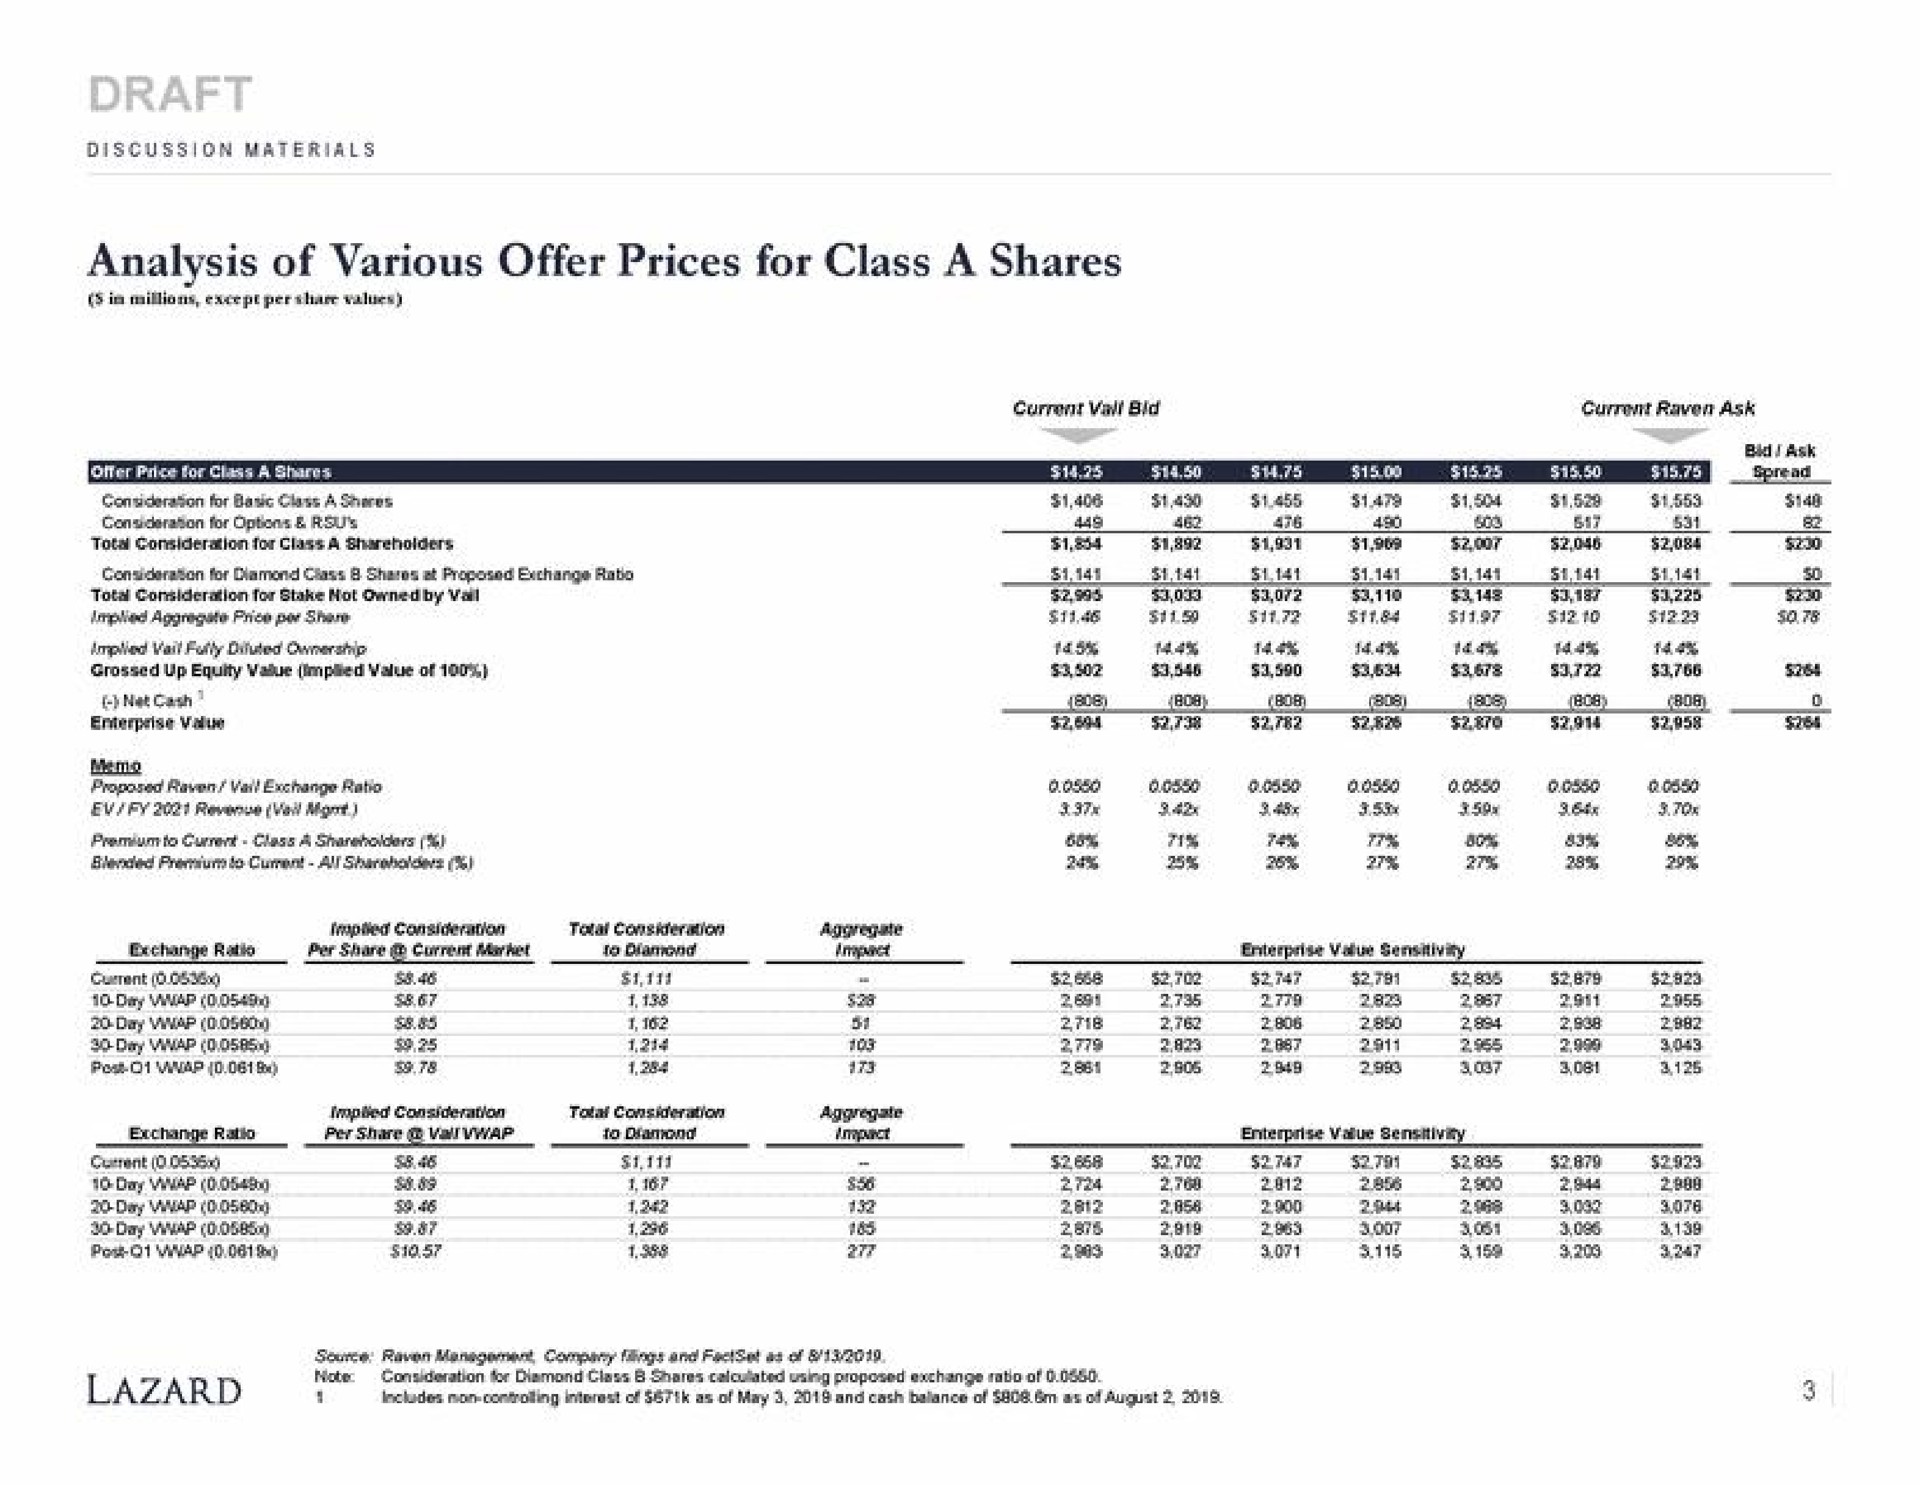 analysis of various offer prices for class a shares | Lazard